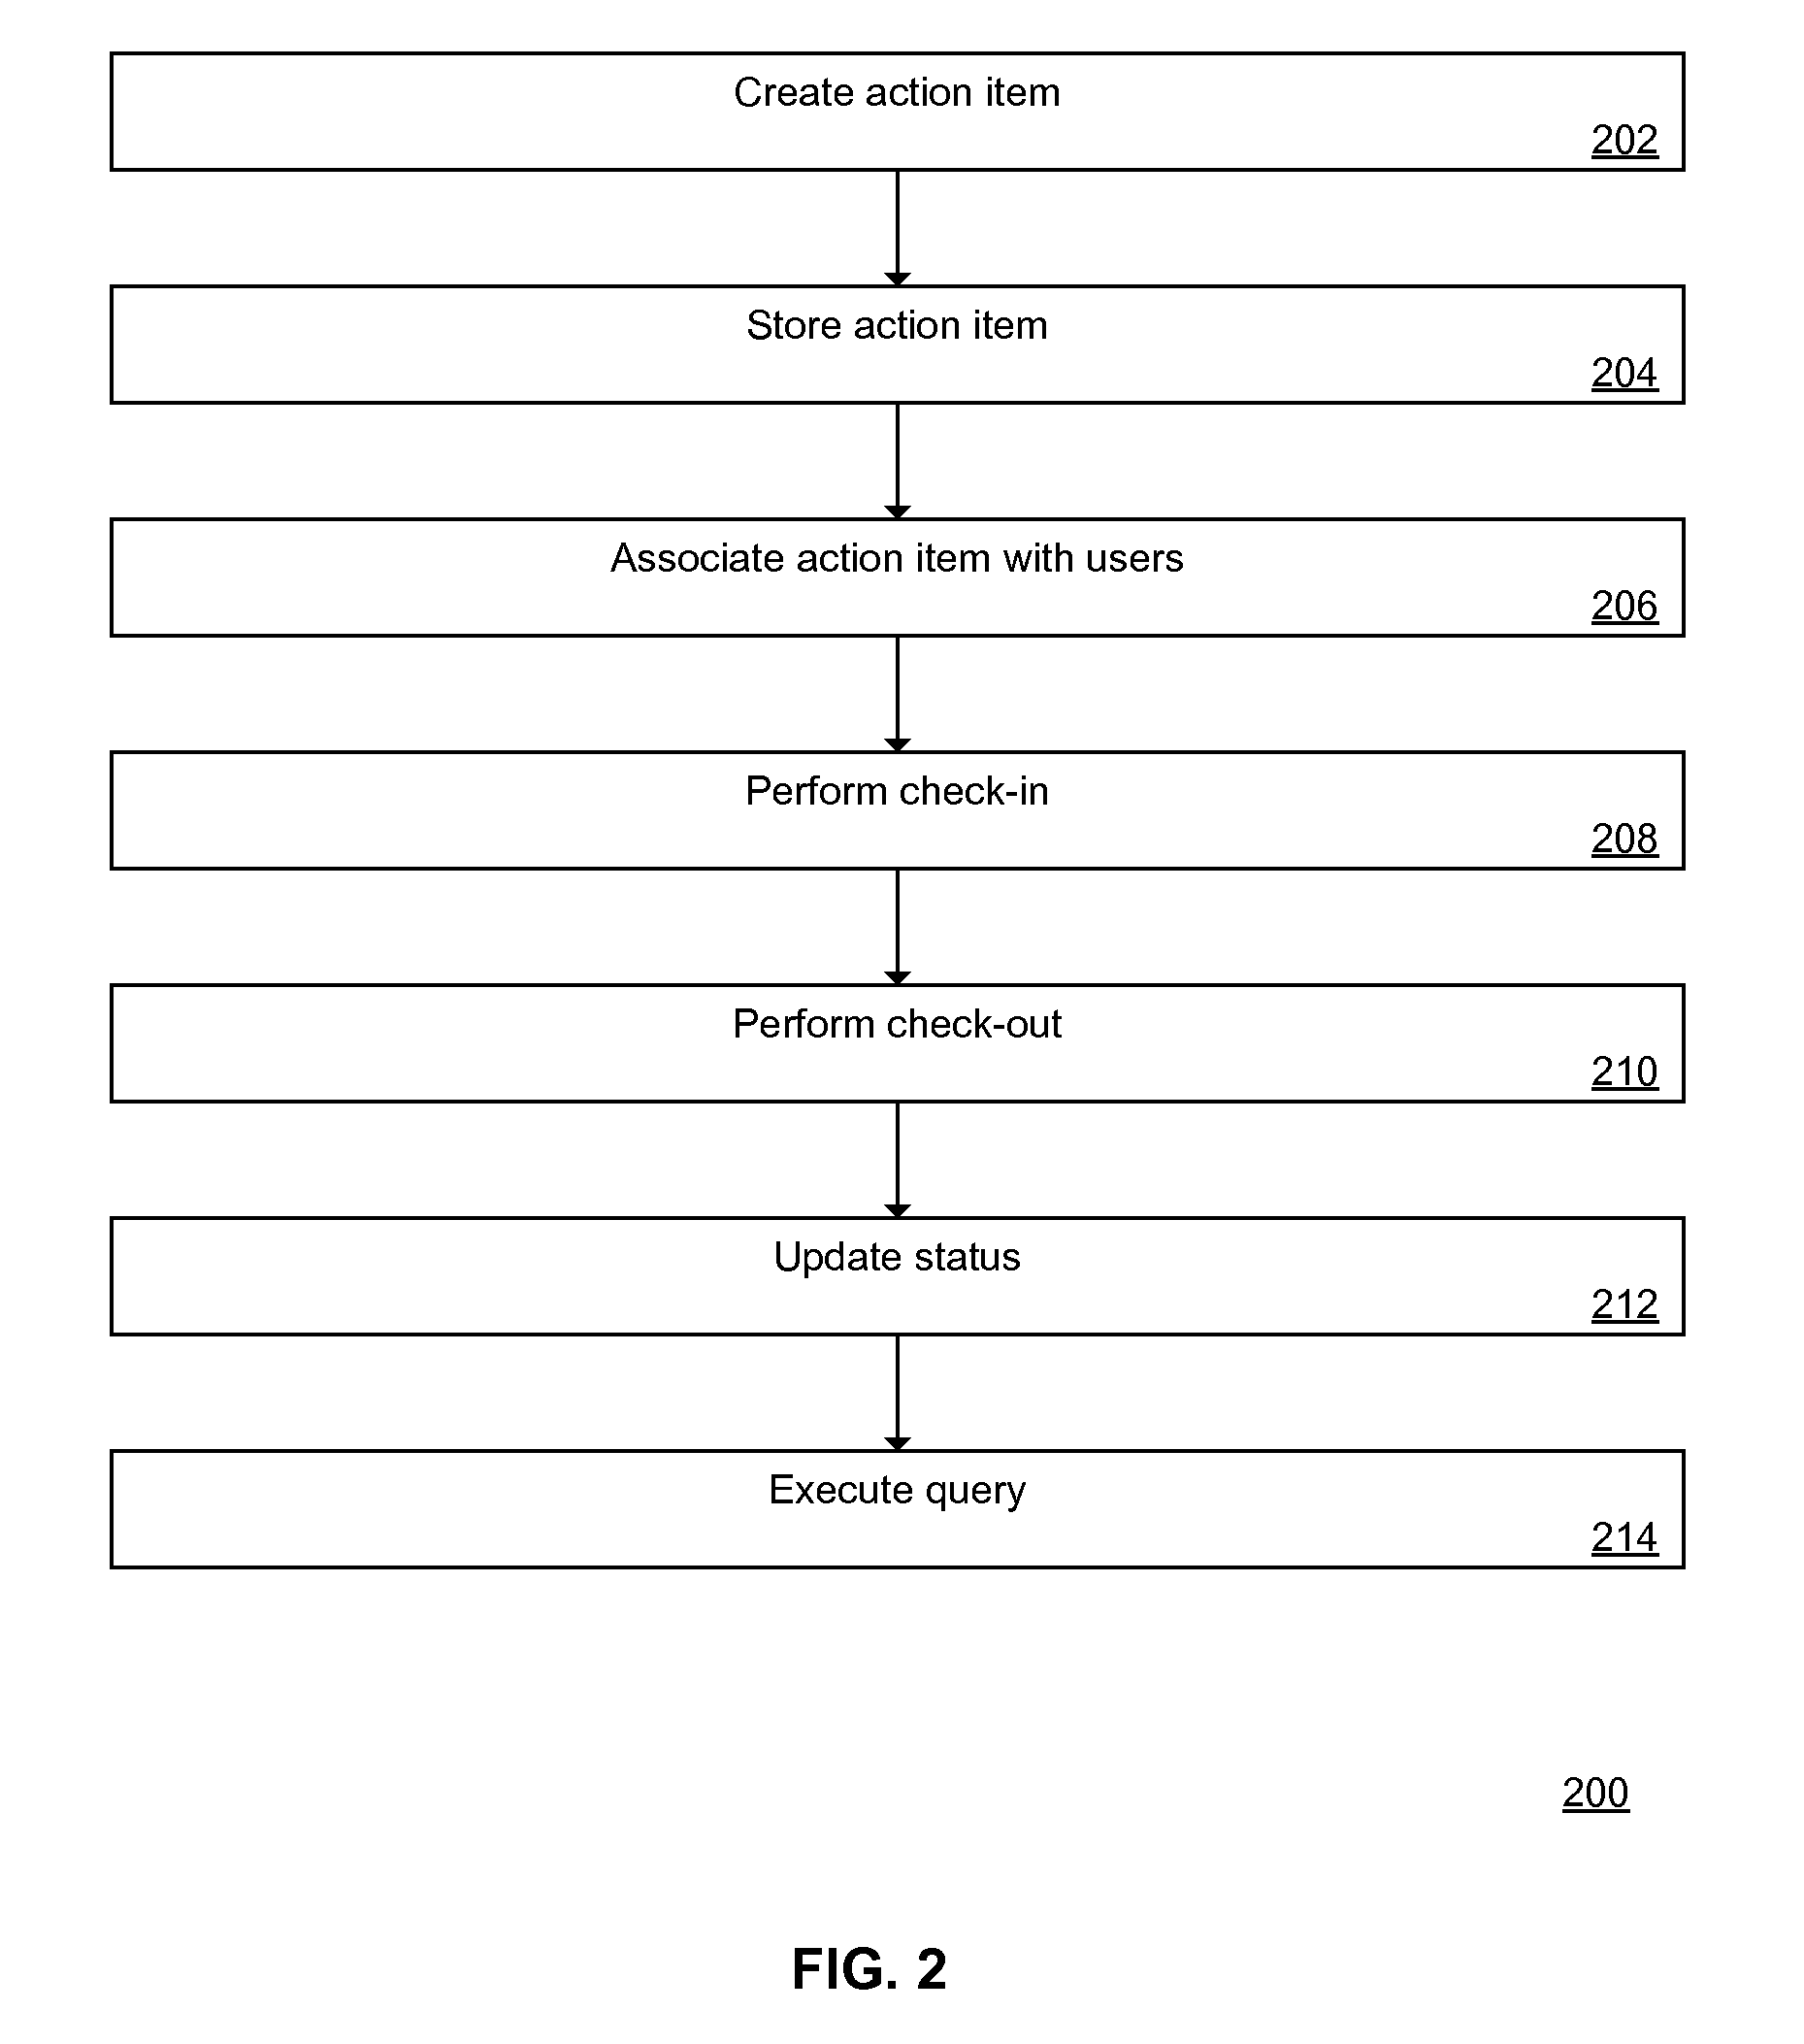 System and Method of Enterprise Action Item Planning, Executing, Tracking and Analytics